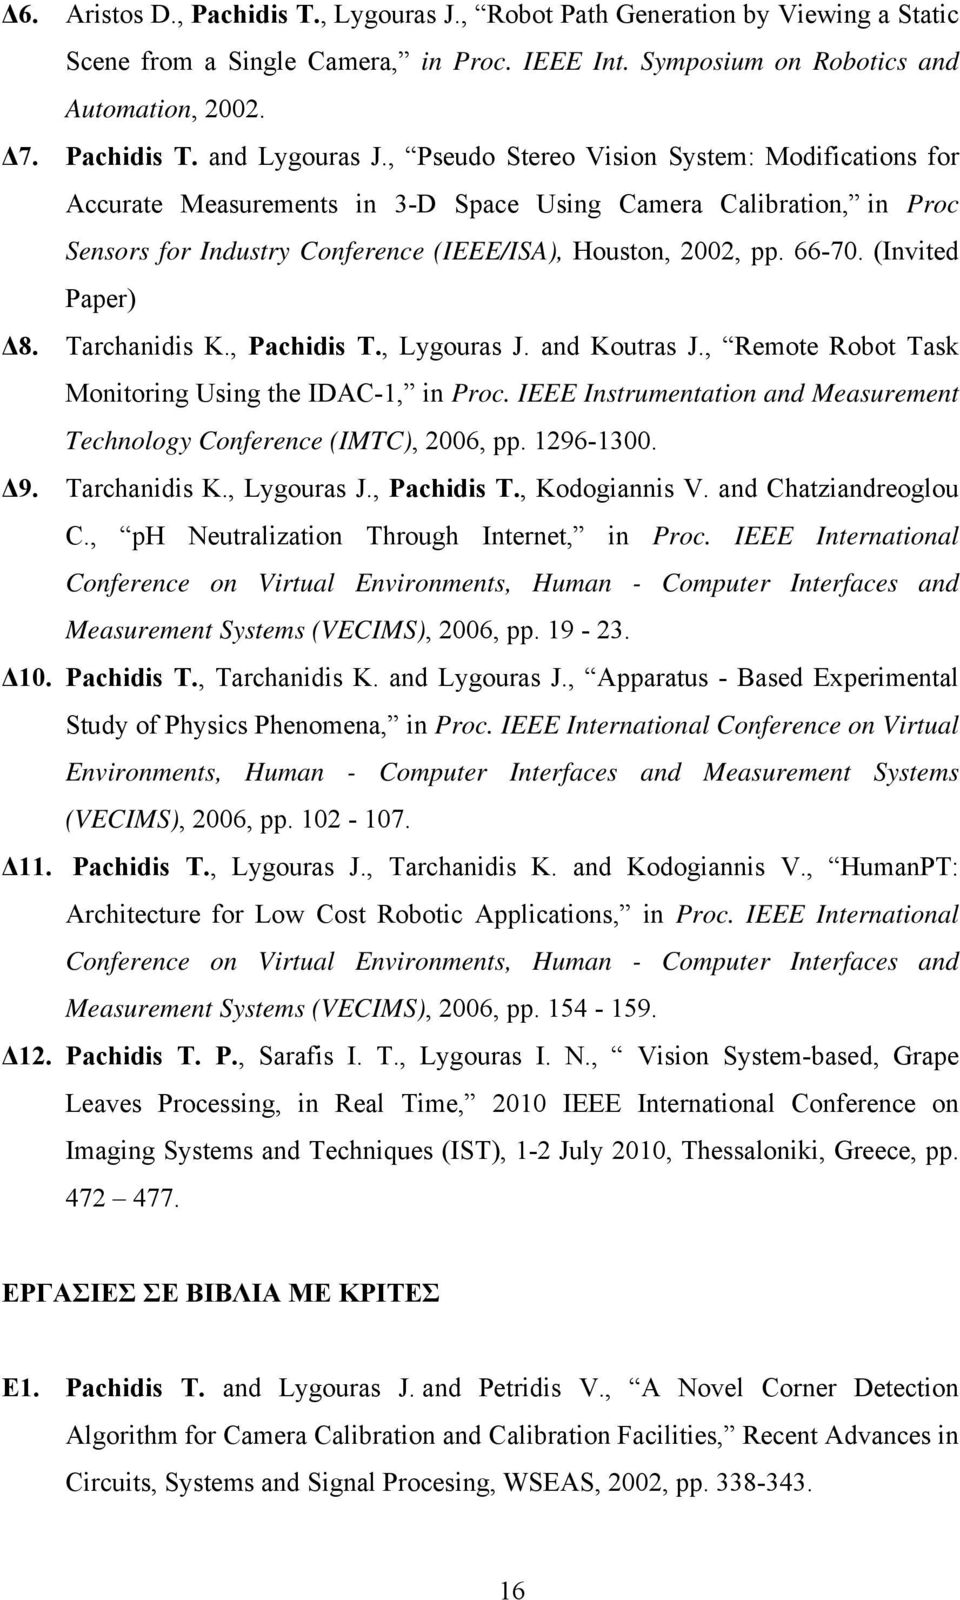 (Invited Paper) Δ8. Tarchanidis K., Pachidis T., Lygouras J. and Koutras J., Remote Robot Task Monitoring Using the IDAC-1, in Proc.